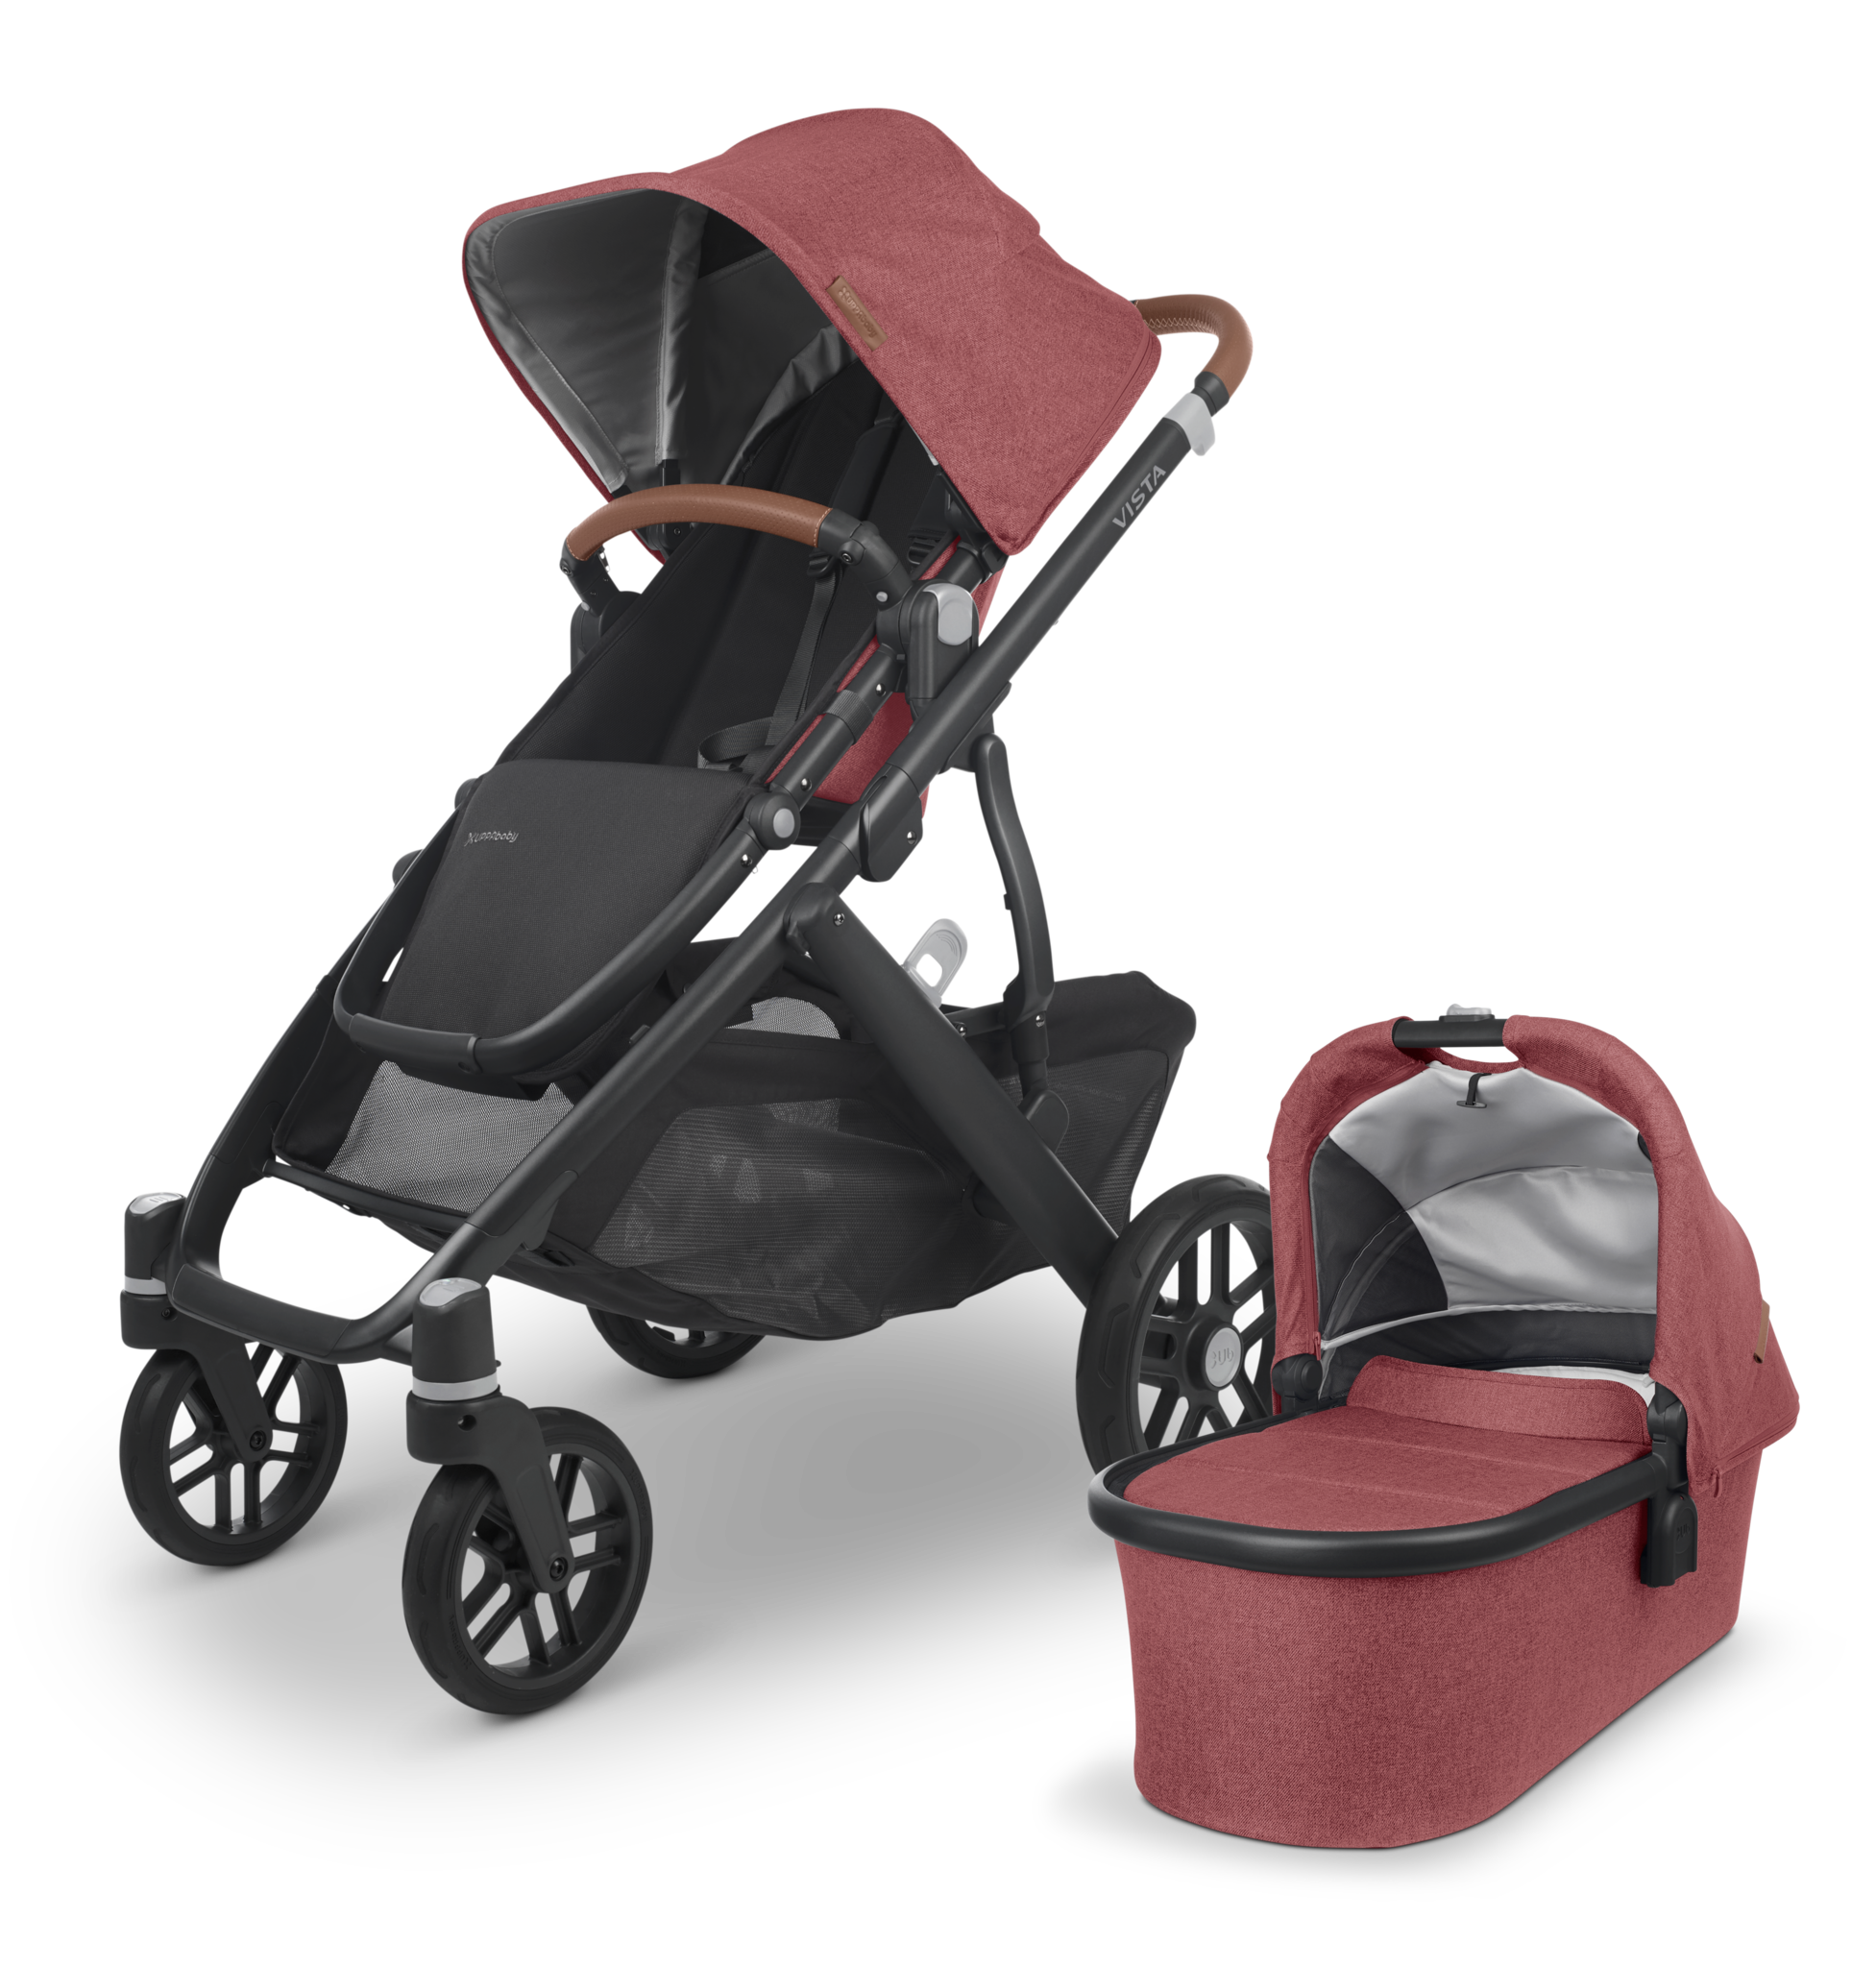 UPPAbaby UPPAbaby VISTA - Lucy (Rosewood)